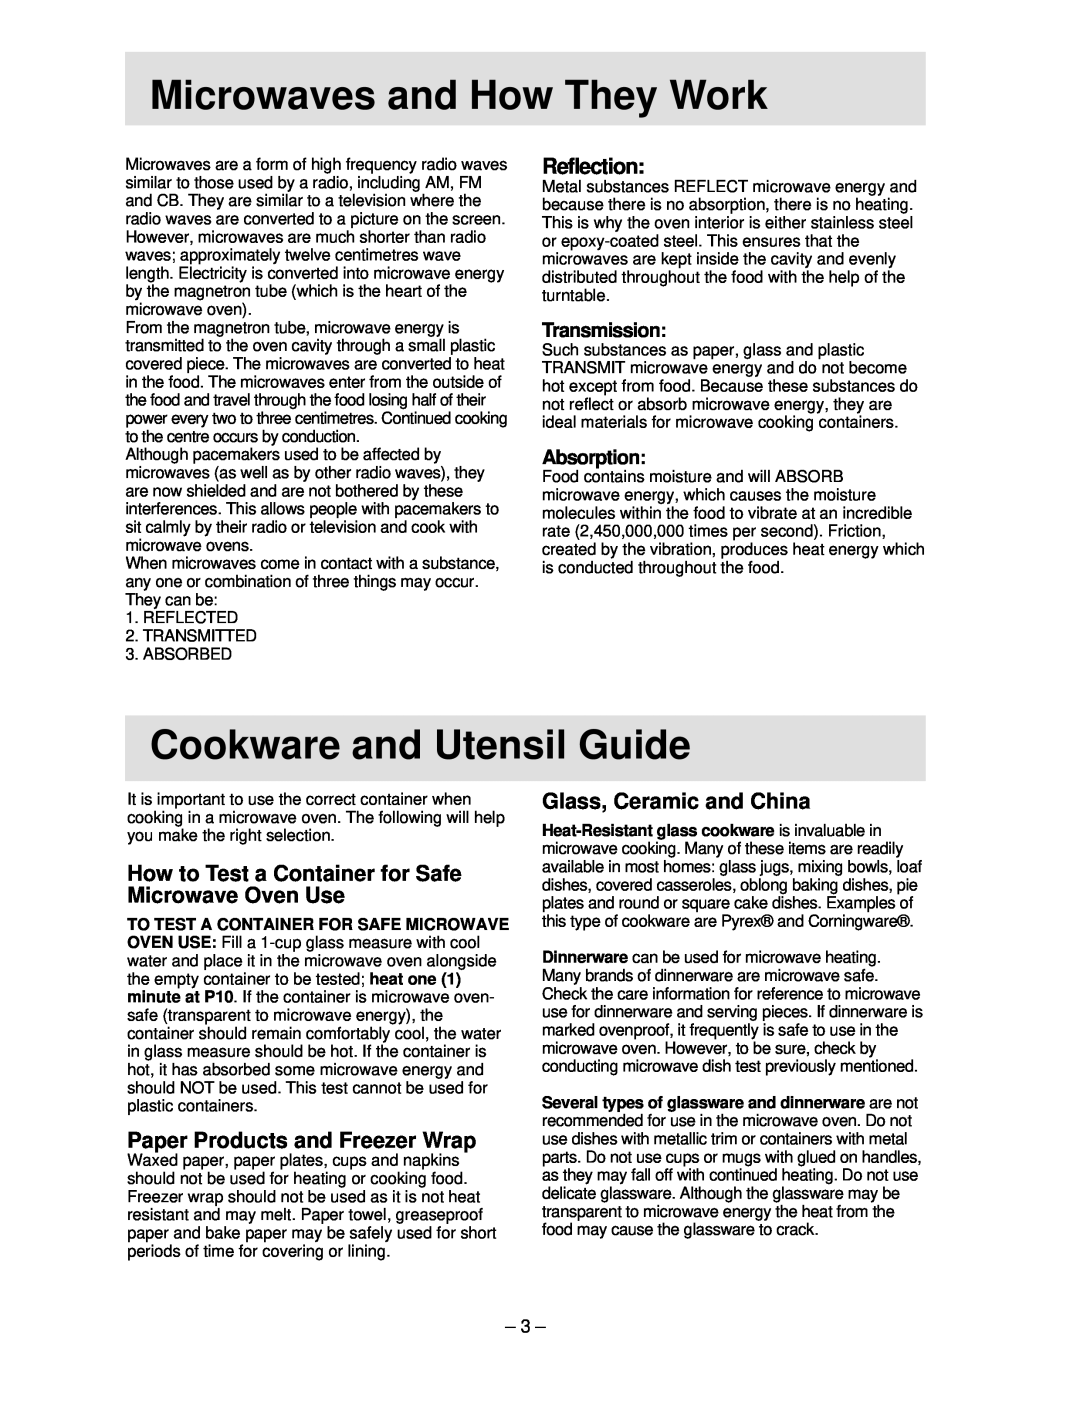 Panasonic NN-S754 hMicrowavesh and How They Work, Cookware and Utensil Guide, Reflection, Paper Products and Freezer Wrap 